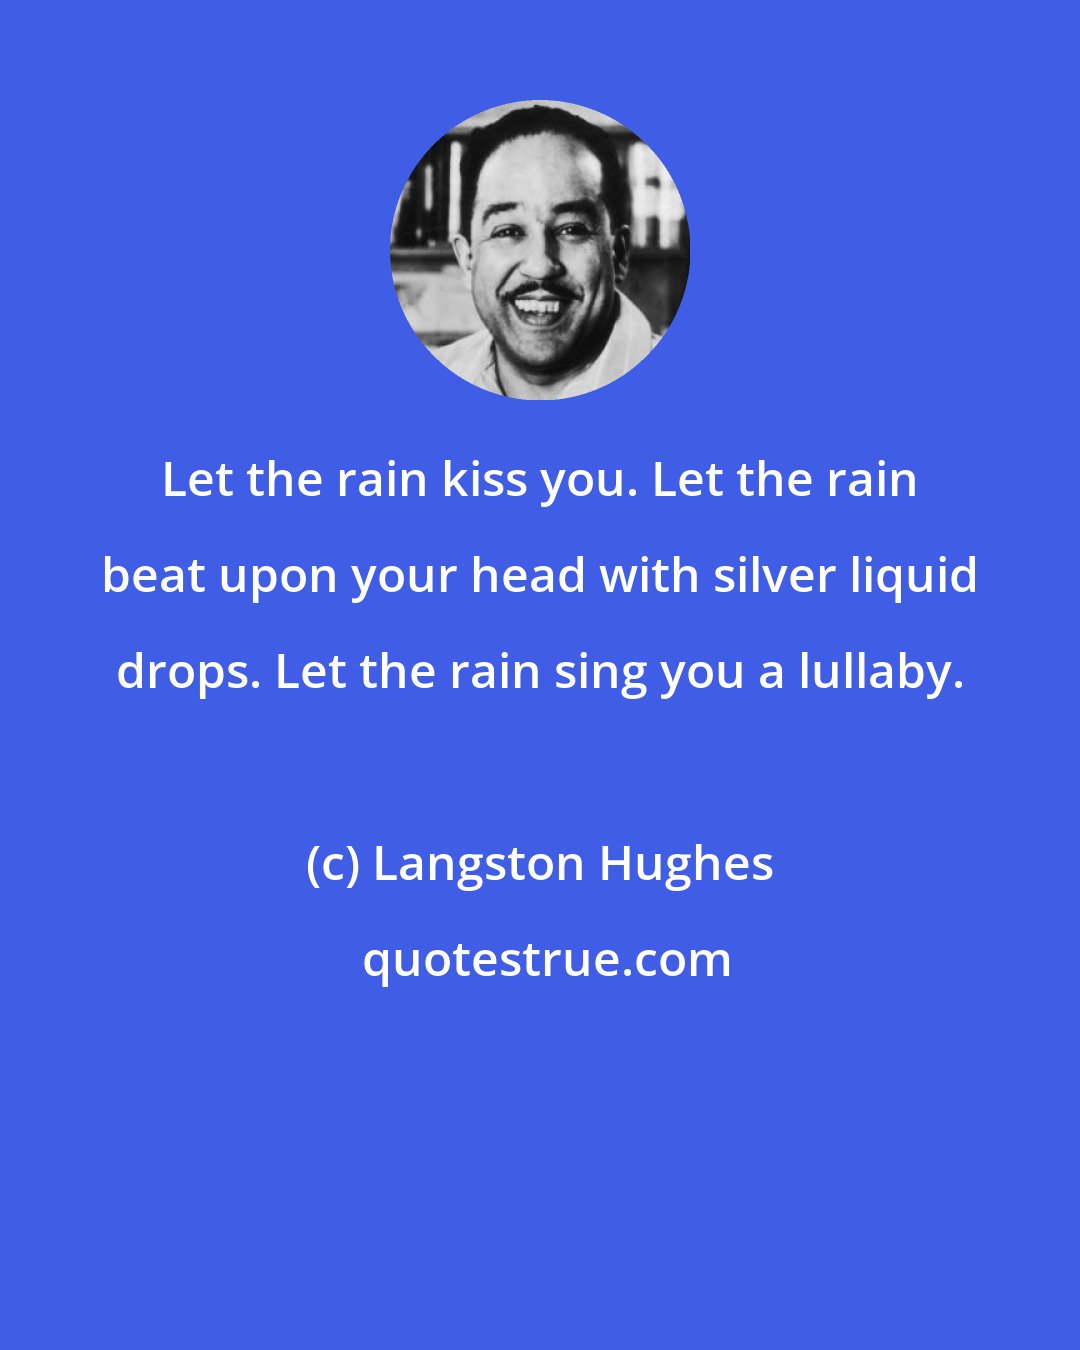 Langston Hughes: Let the rain kiss you. Let the rain beat upon your head with silver liquid drops. Let the rain sing you a lullaby.